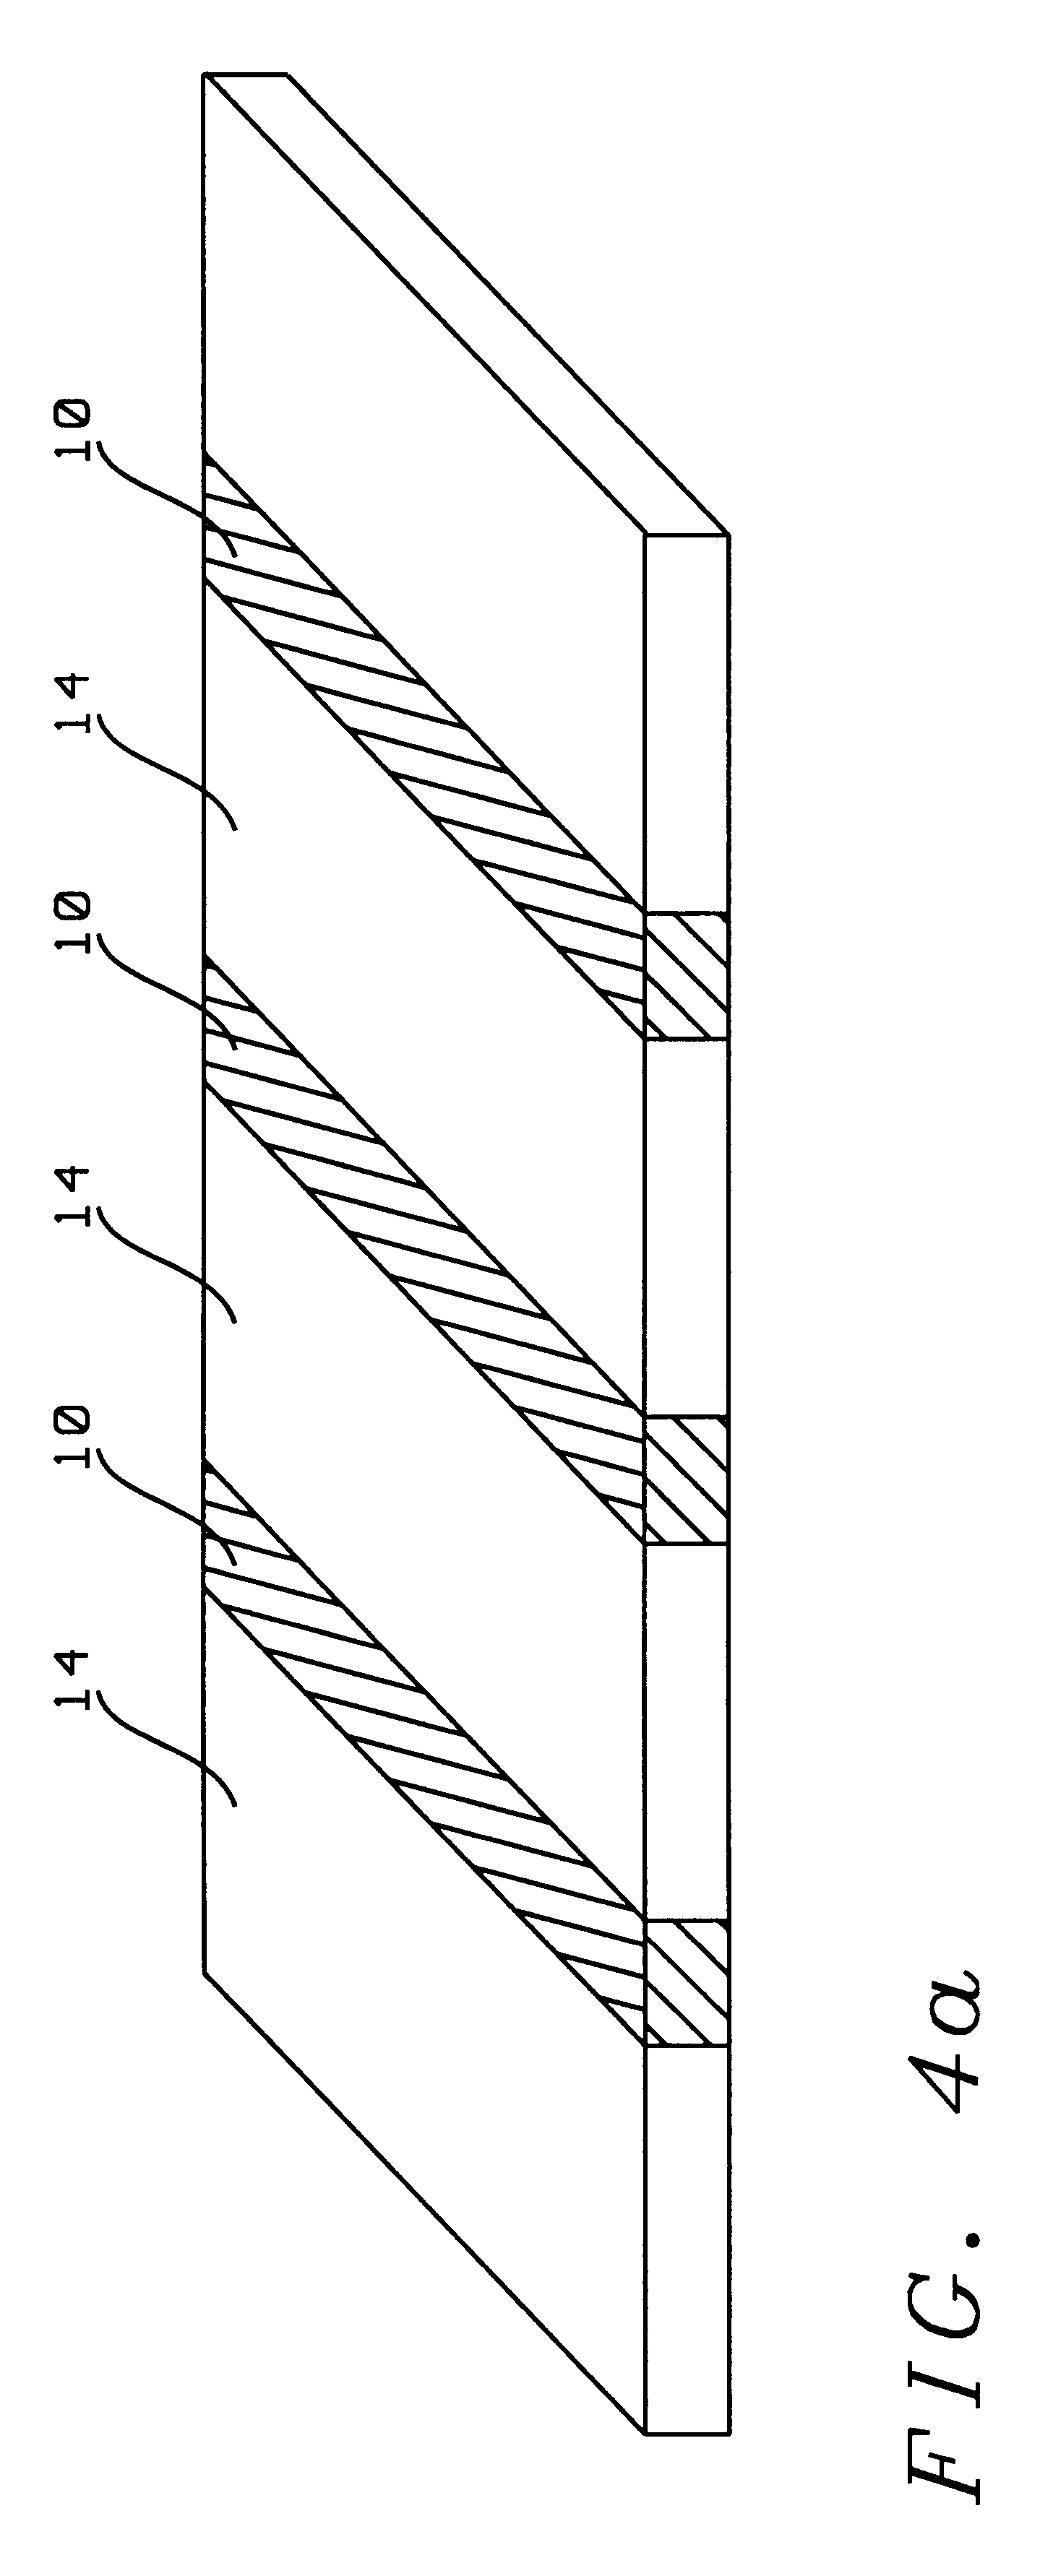 Method to fabricate RF inductors with minimum area